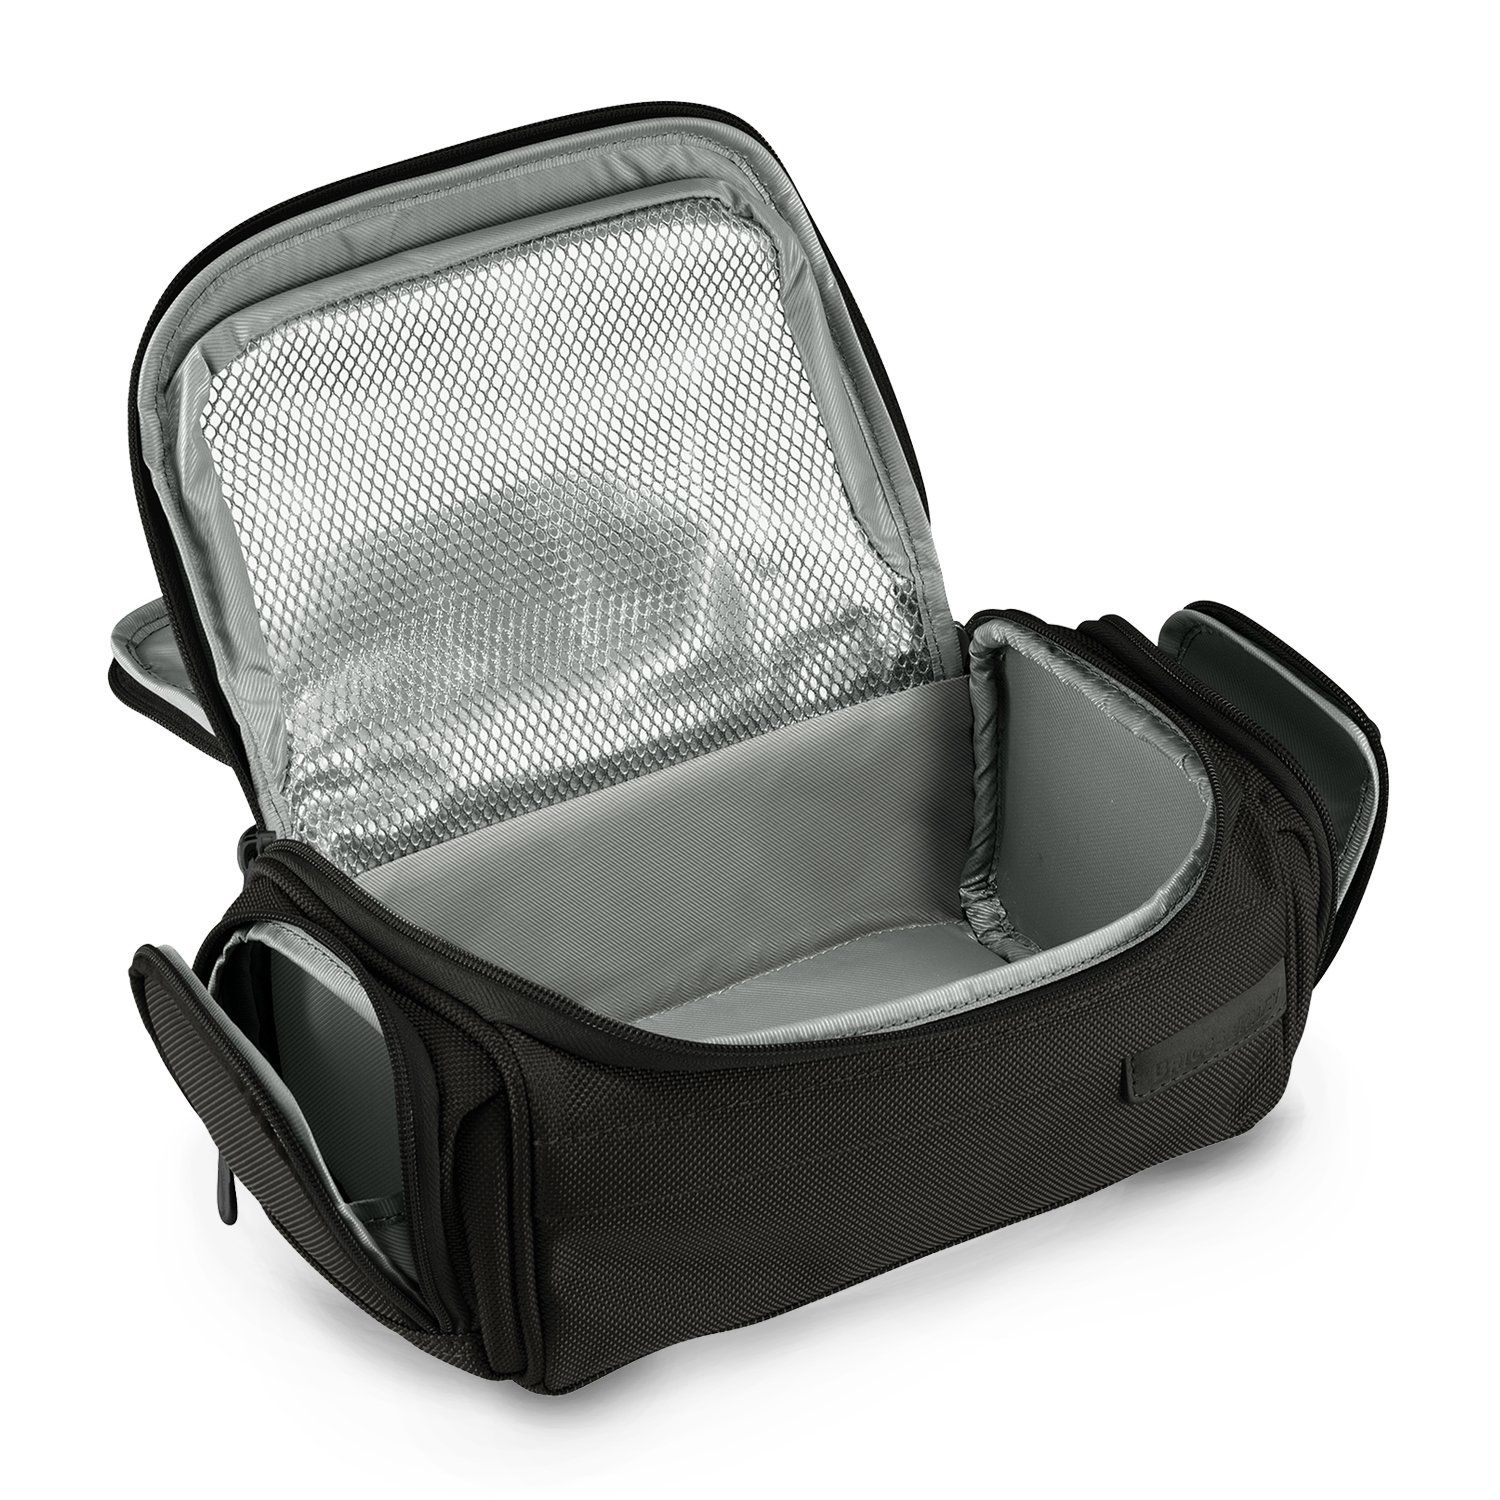 Designed for executives on the go, this smartly designed toiletry kit is as much a top performer as any Baseline luggage bag. Intuitive pockets keep all your essentials at your fingertips. Key features include: Main compartment is wet/dry to keep leaks from spreading into your luggage. Large U-shaped opening allows easy access into roomy main compartment. Four section design keeps you organised. Easy access transparent top pocket and gusseted side pockets are wet/dry to keep leaks from spreading. A webbing side handle for easy carrying. Rubber feet positioned on base lift kit off wet surfaces.